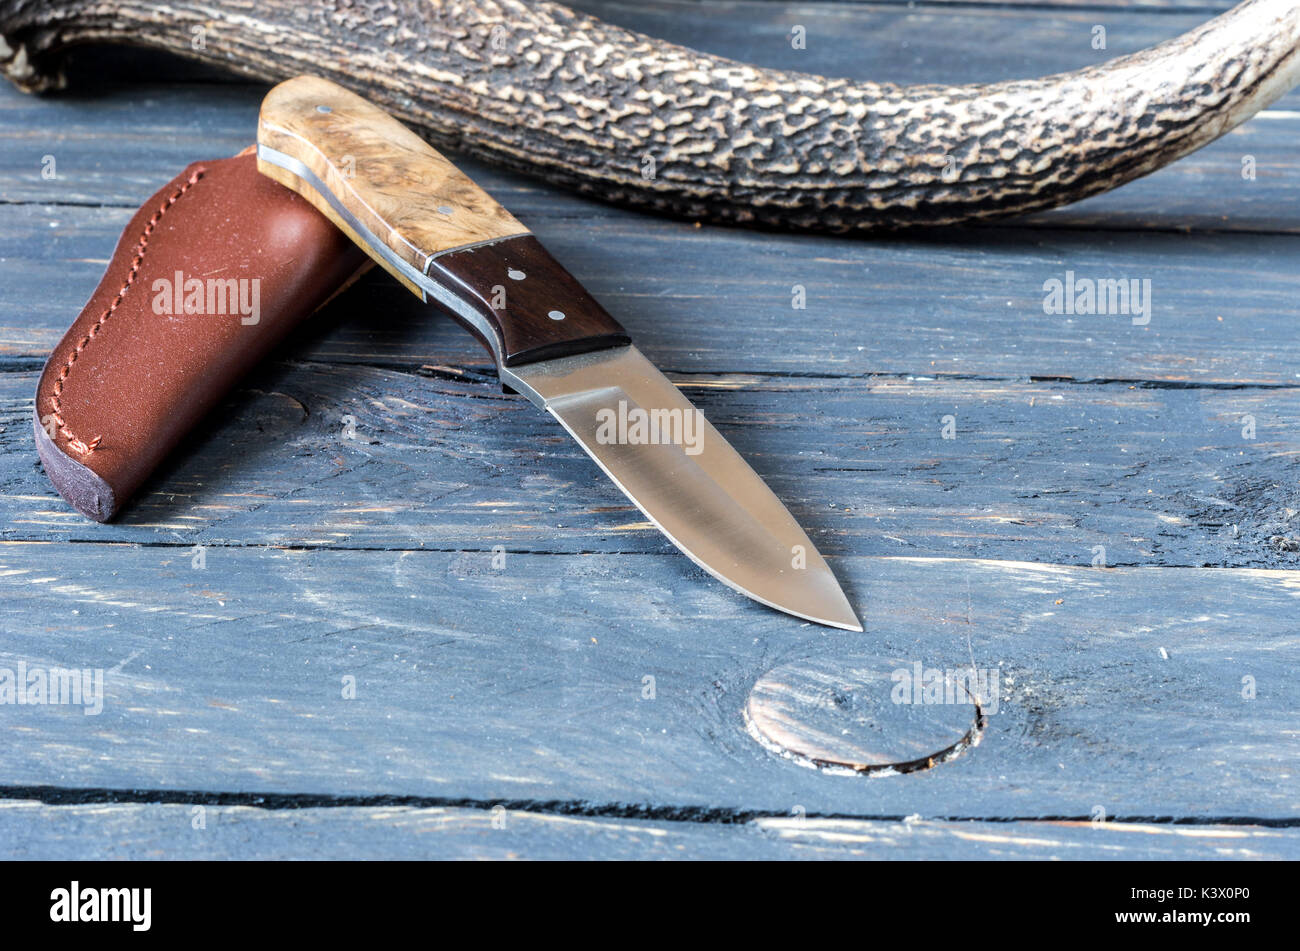 Swedish Knife With Leather Sheath Knife Swedish Hunting Knife With Typing  Handle Stock Photo - Download Image Now - iStock